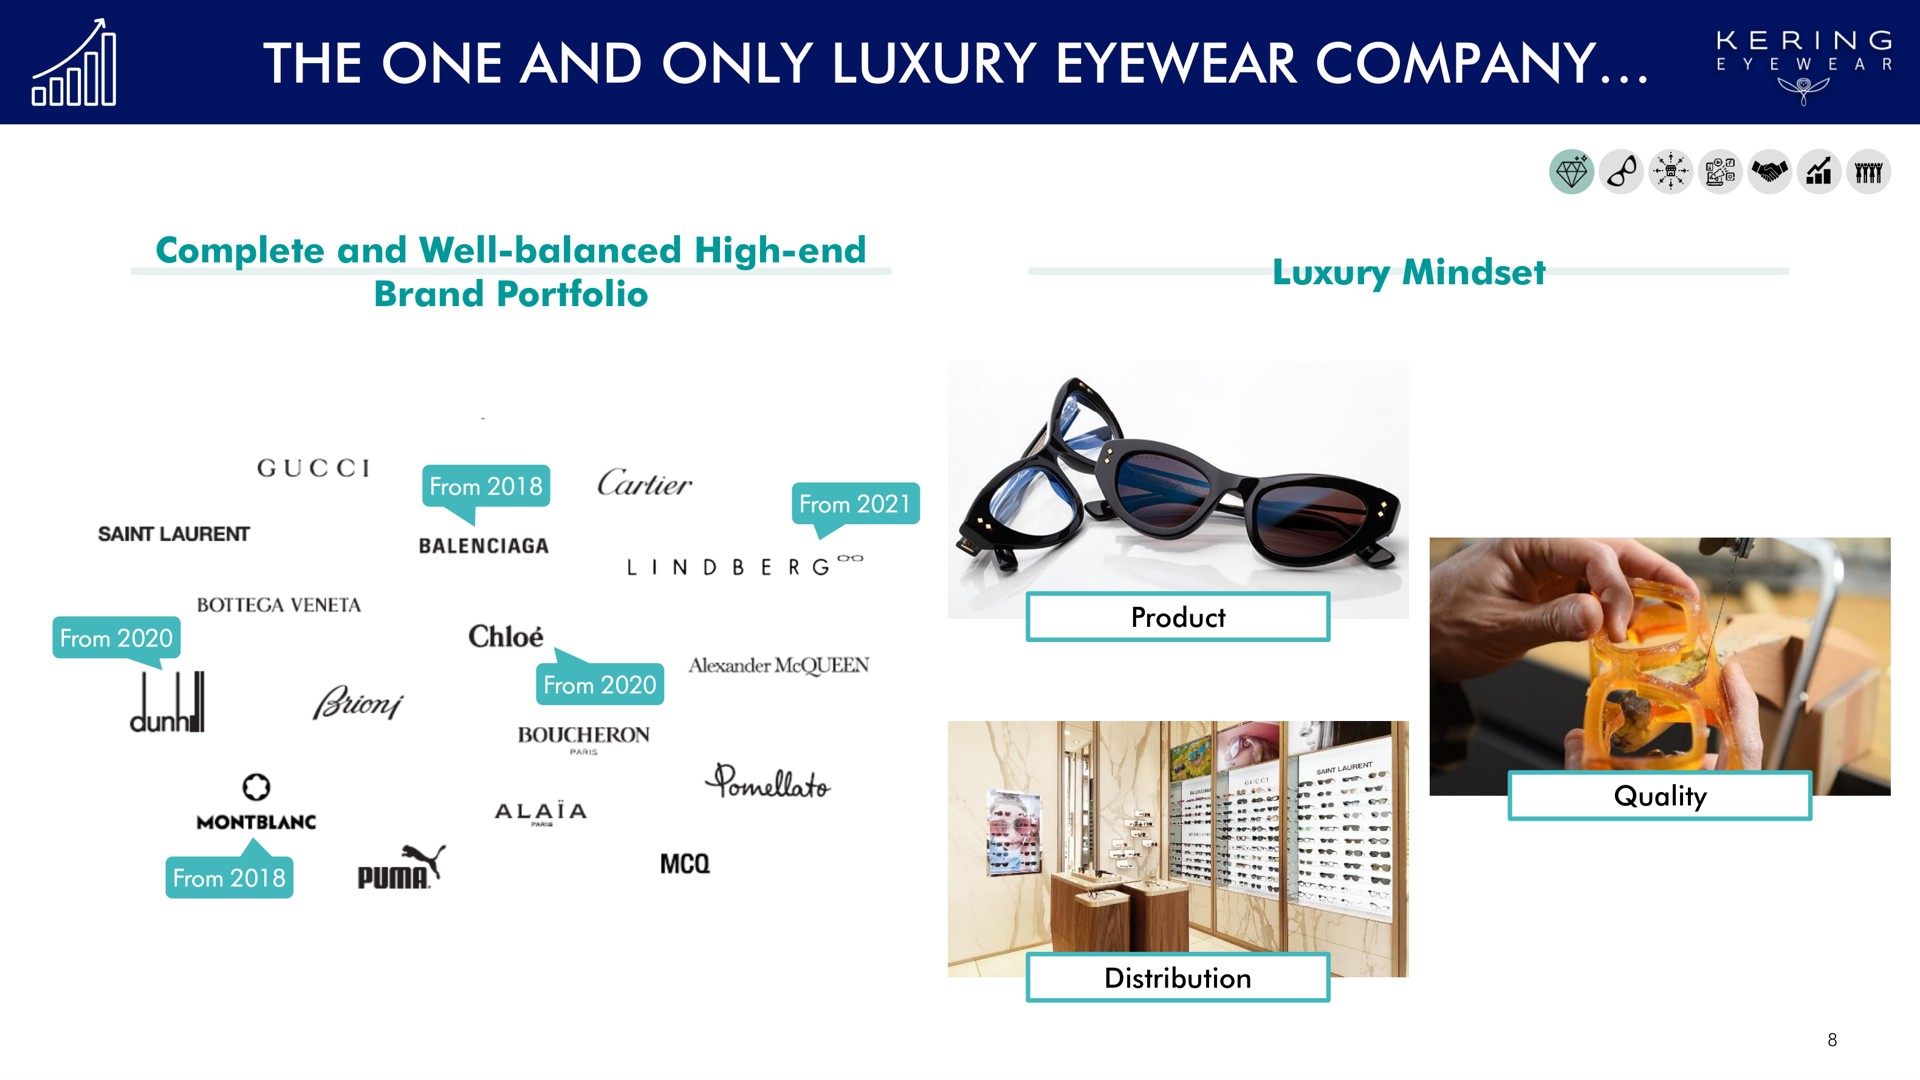 the one and only luxury eyewear company | Kering